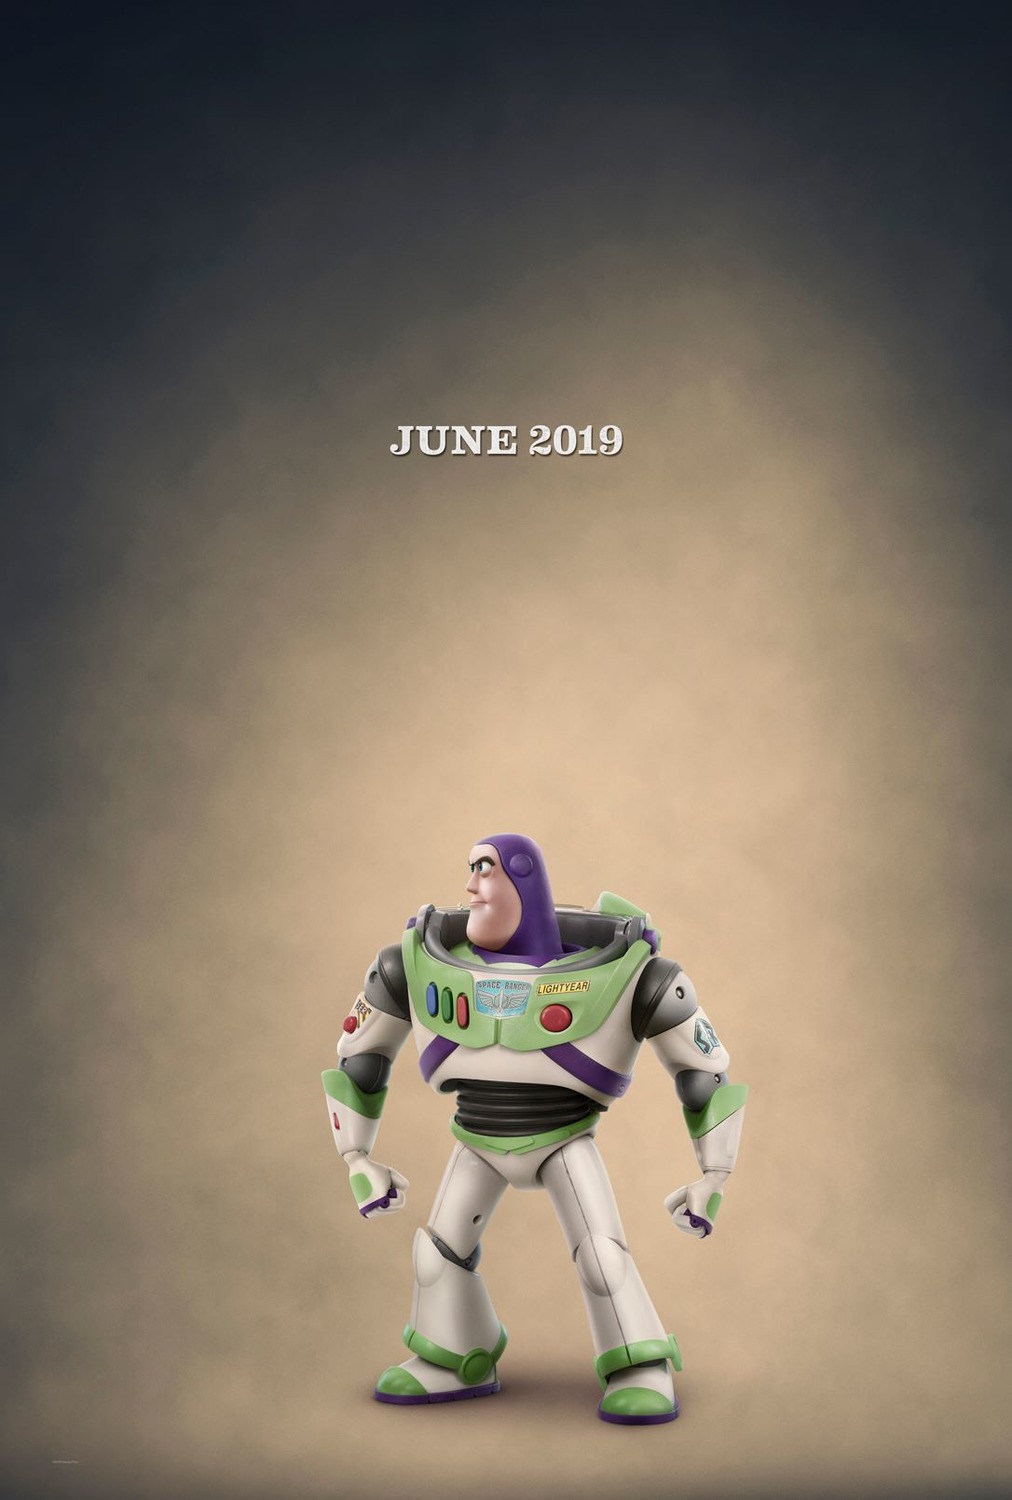 Toy Story 4 Movie Poster (#2 of 29) - IMP Awards